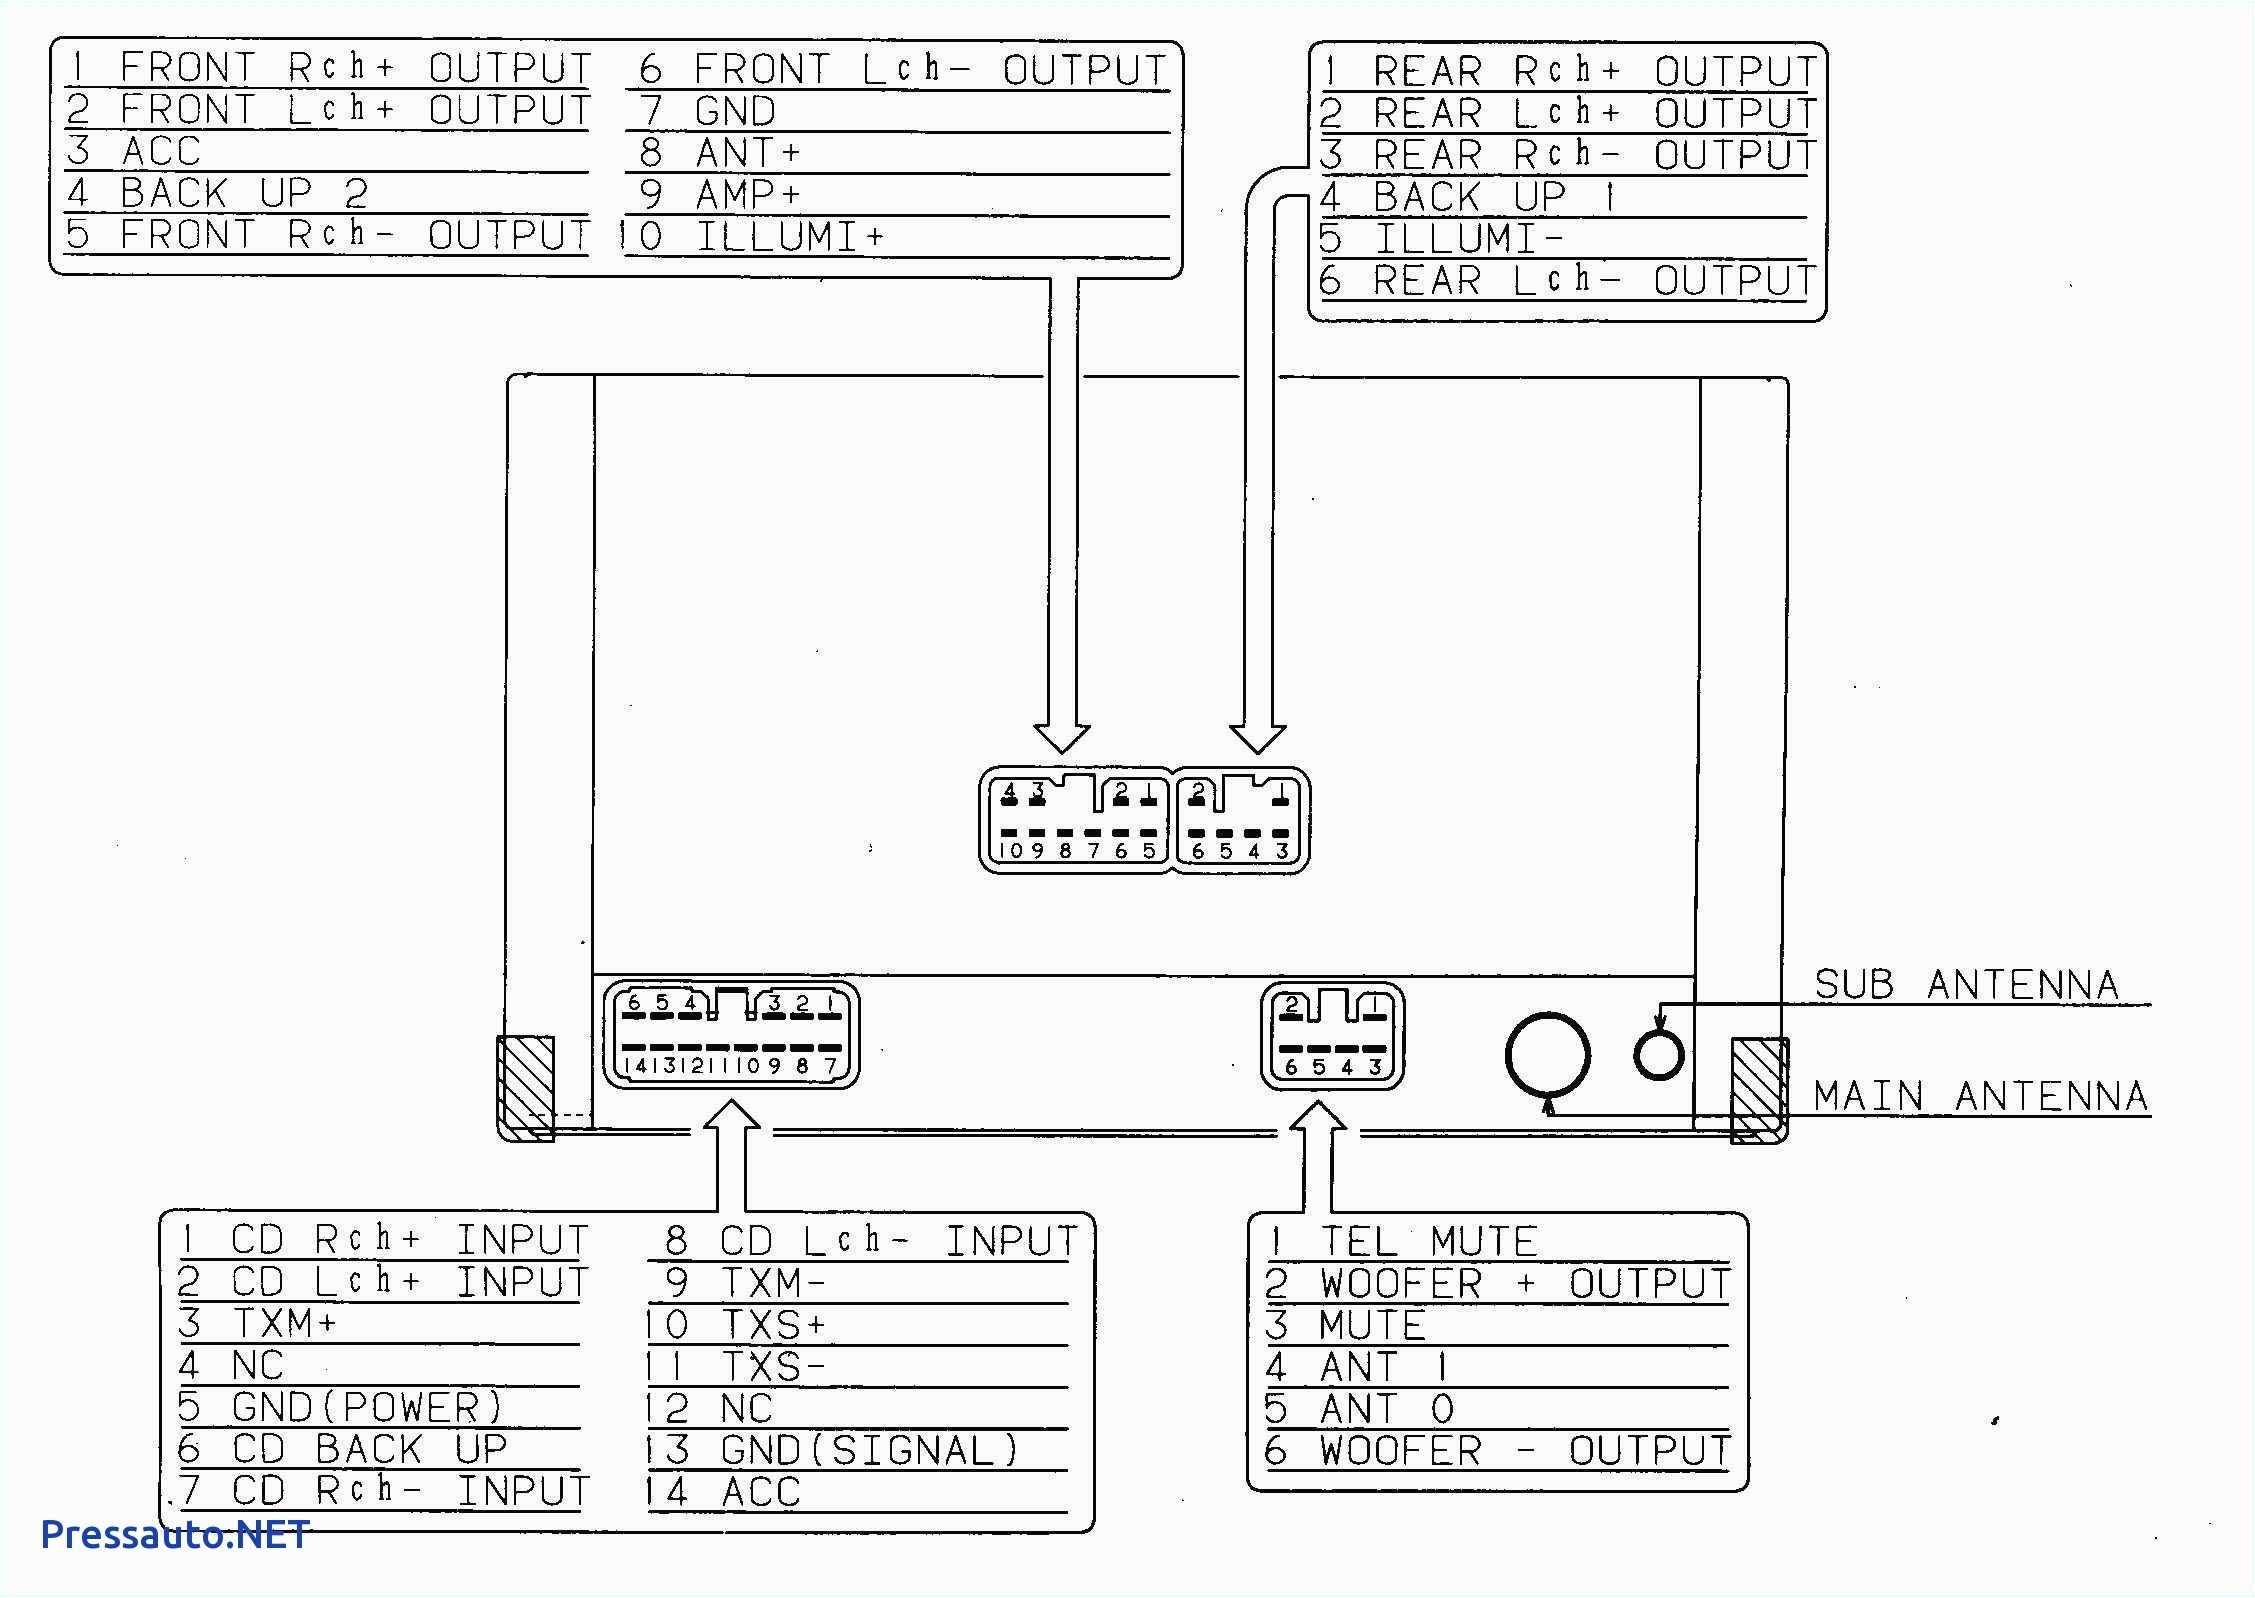 pioneer deh wiring harness diagram further pioneer car stereo wiring pioneer deh wiring harness diagram also pioneer deh wiring harness